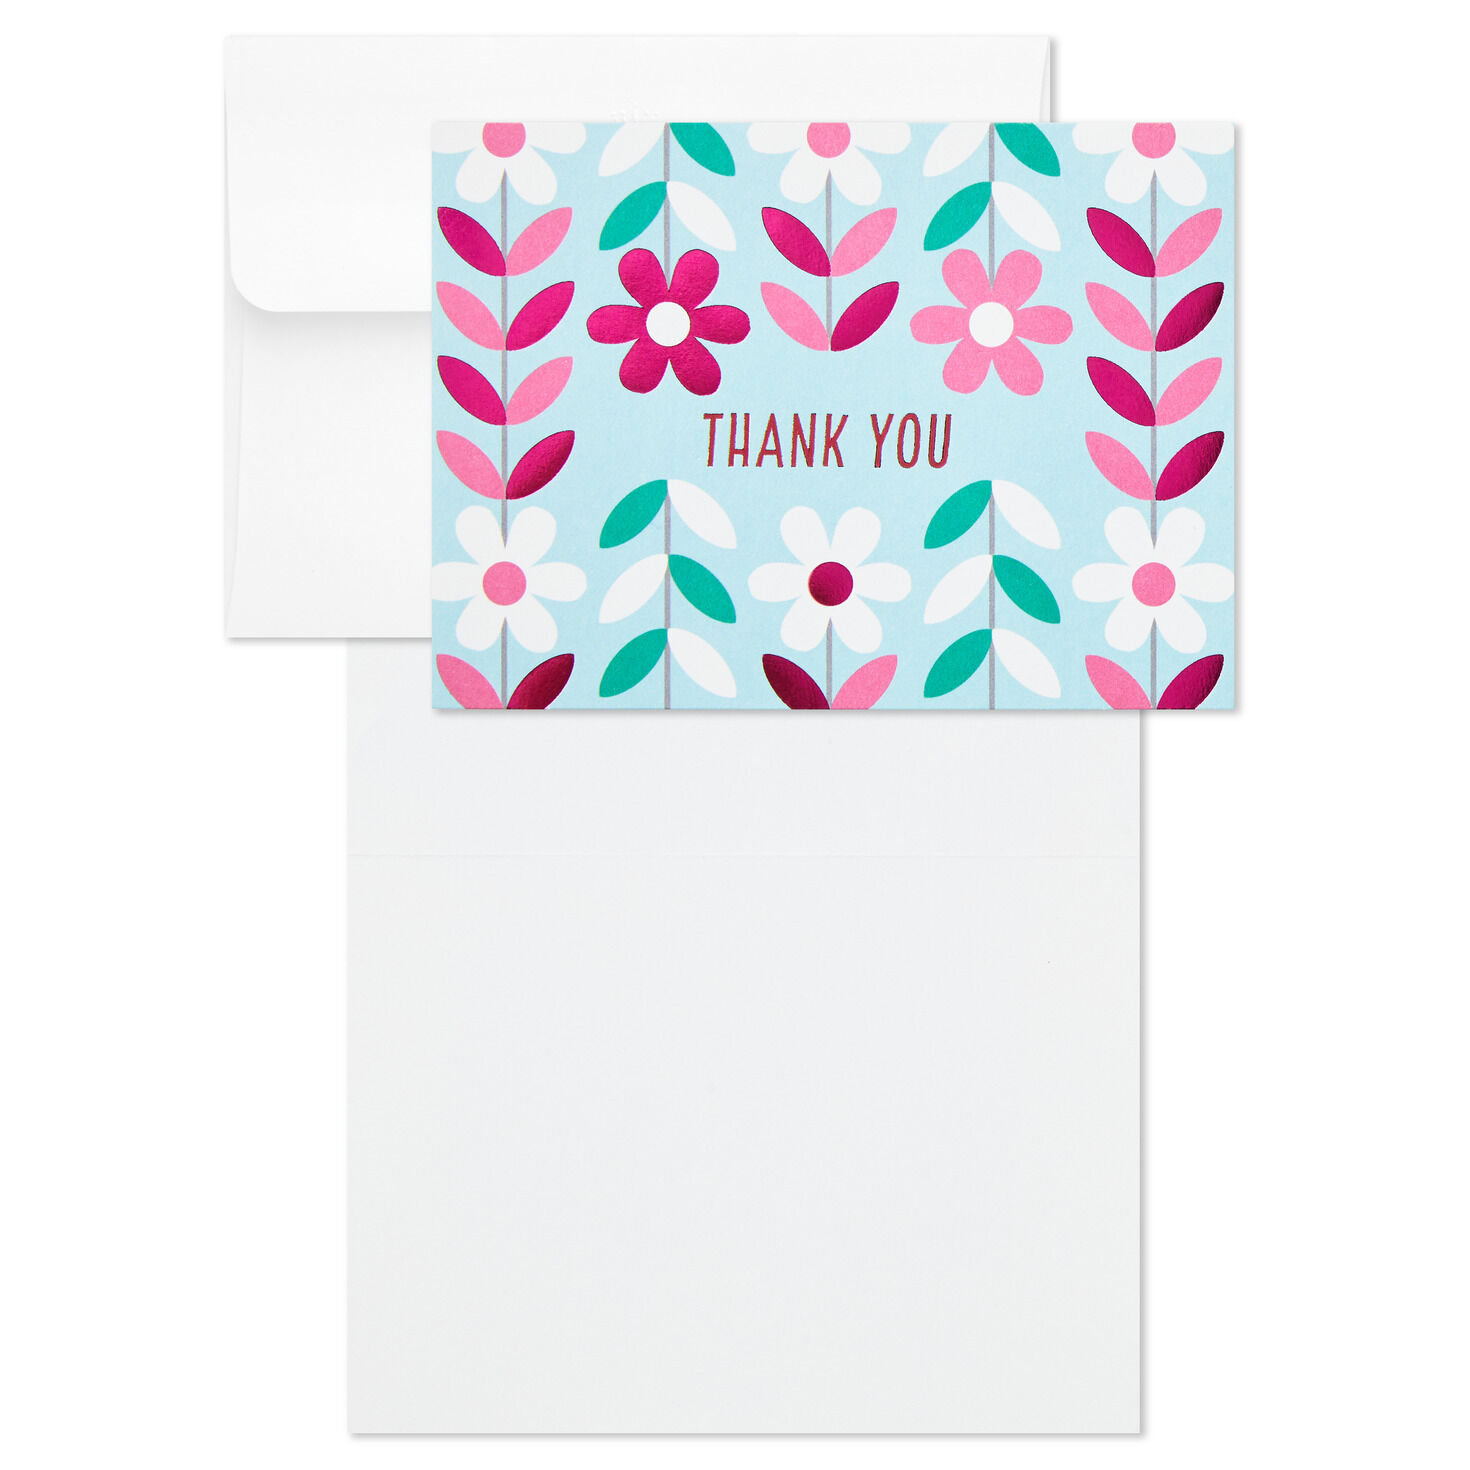 4 Assorted Cards for All Occasions Blank Notecards and Envelopes Stationary Set for Personalized Greeting Cards-4x5.5 Blank Cards with Envelopes 48 Floral Blank Note Cards with Envelopes 